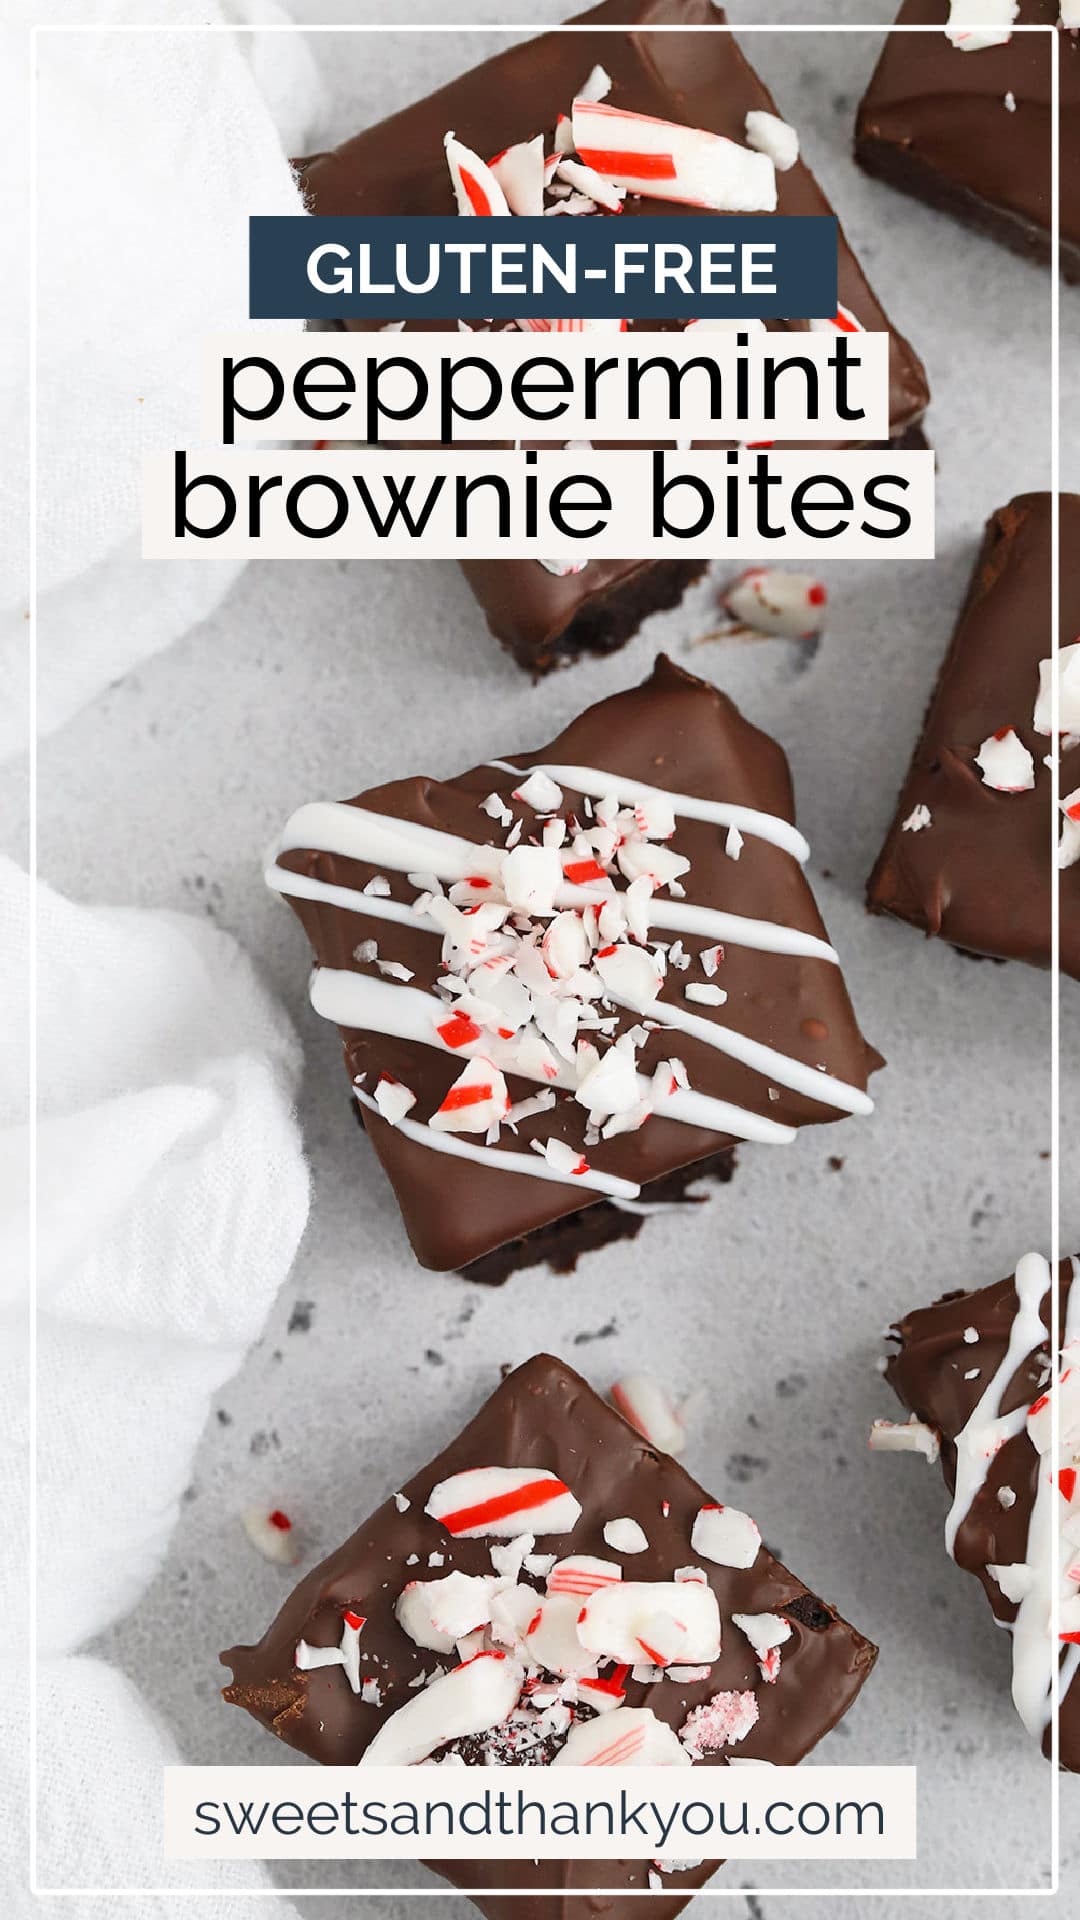  Gluten-Free Peppermint Brownie Bites - These gluten-free brownie bites are dipped in chocolate & coated with crunchy peppermint bits! // Gluten-free peppermint brownies // gluten-free brownie bites recipe // gluten-free christmas cookies // gluten-free holiday dessert // gluten-free christmas recipes